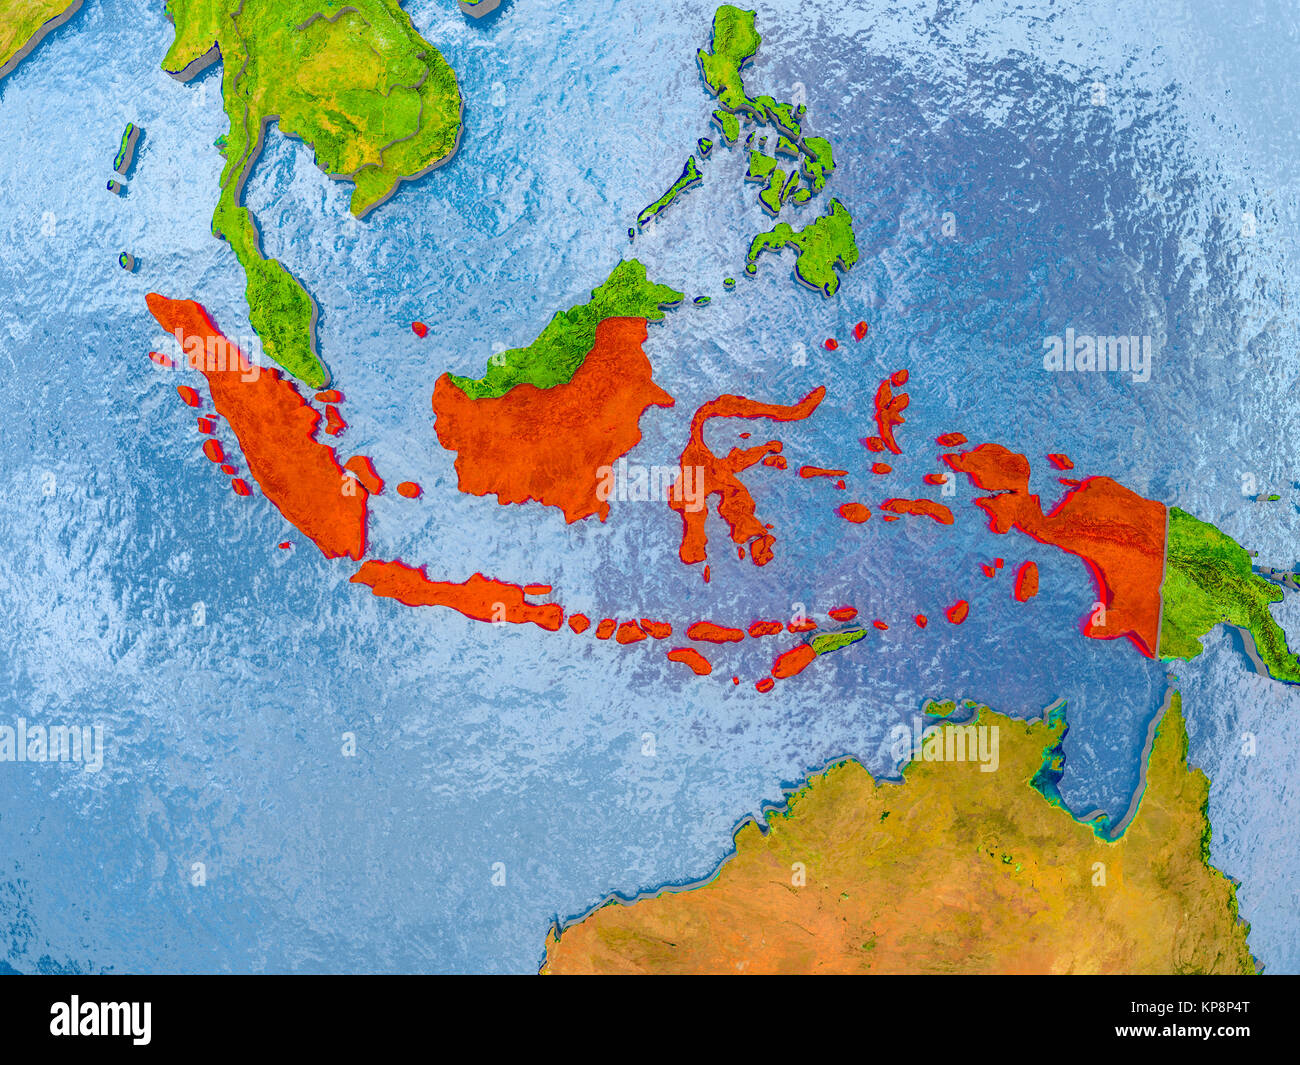 Indonesia in red on realistic map with embossed countries. 3D illustration. Elements of this image furnished by NASA. Stock Photo